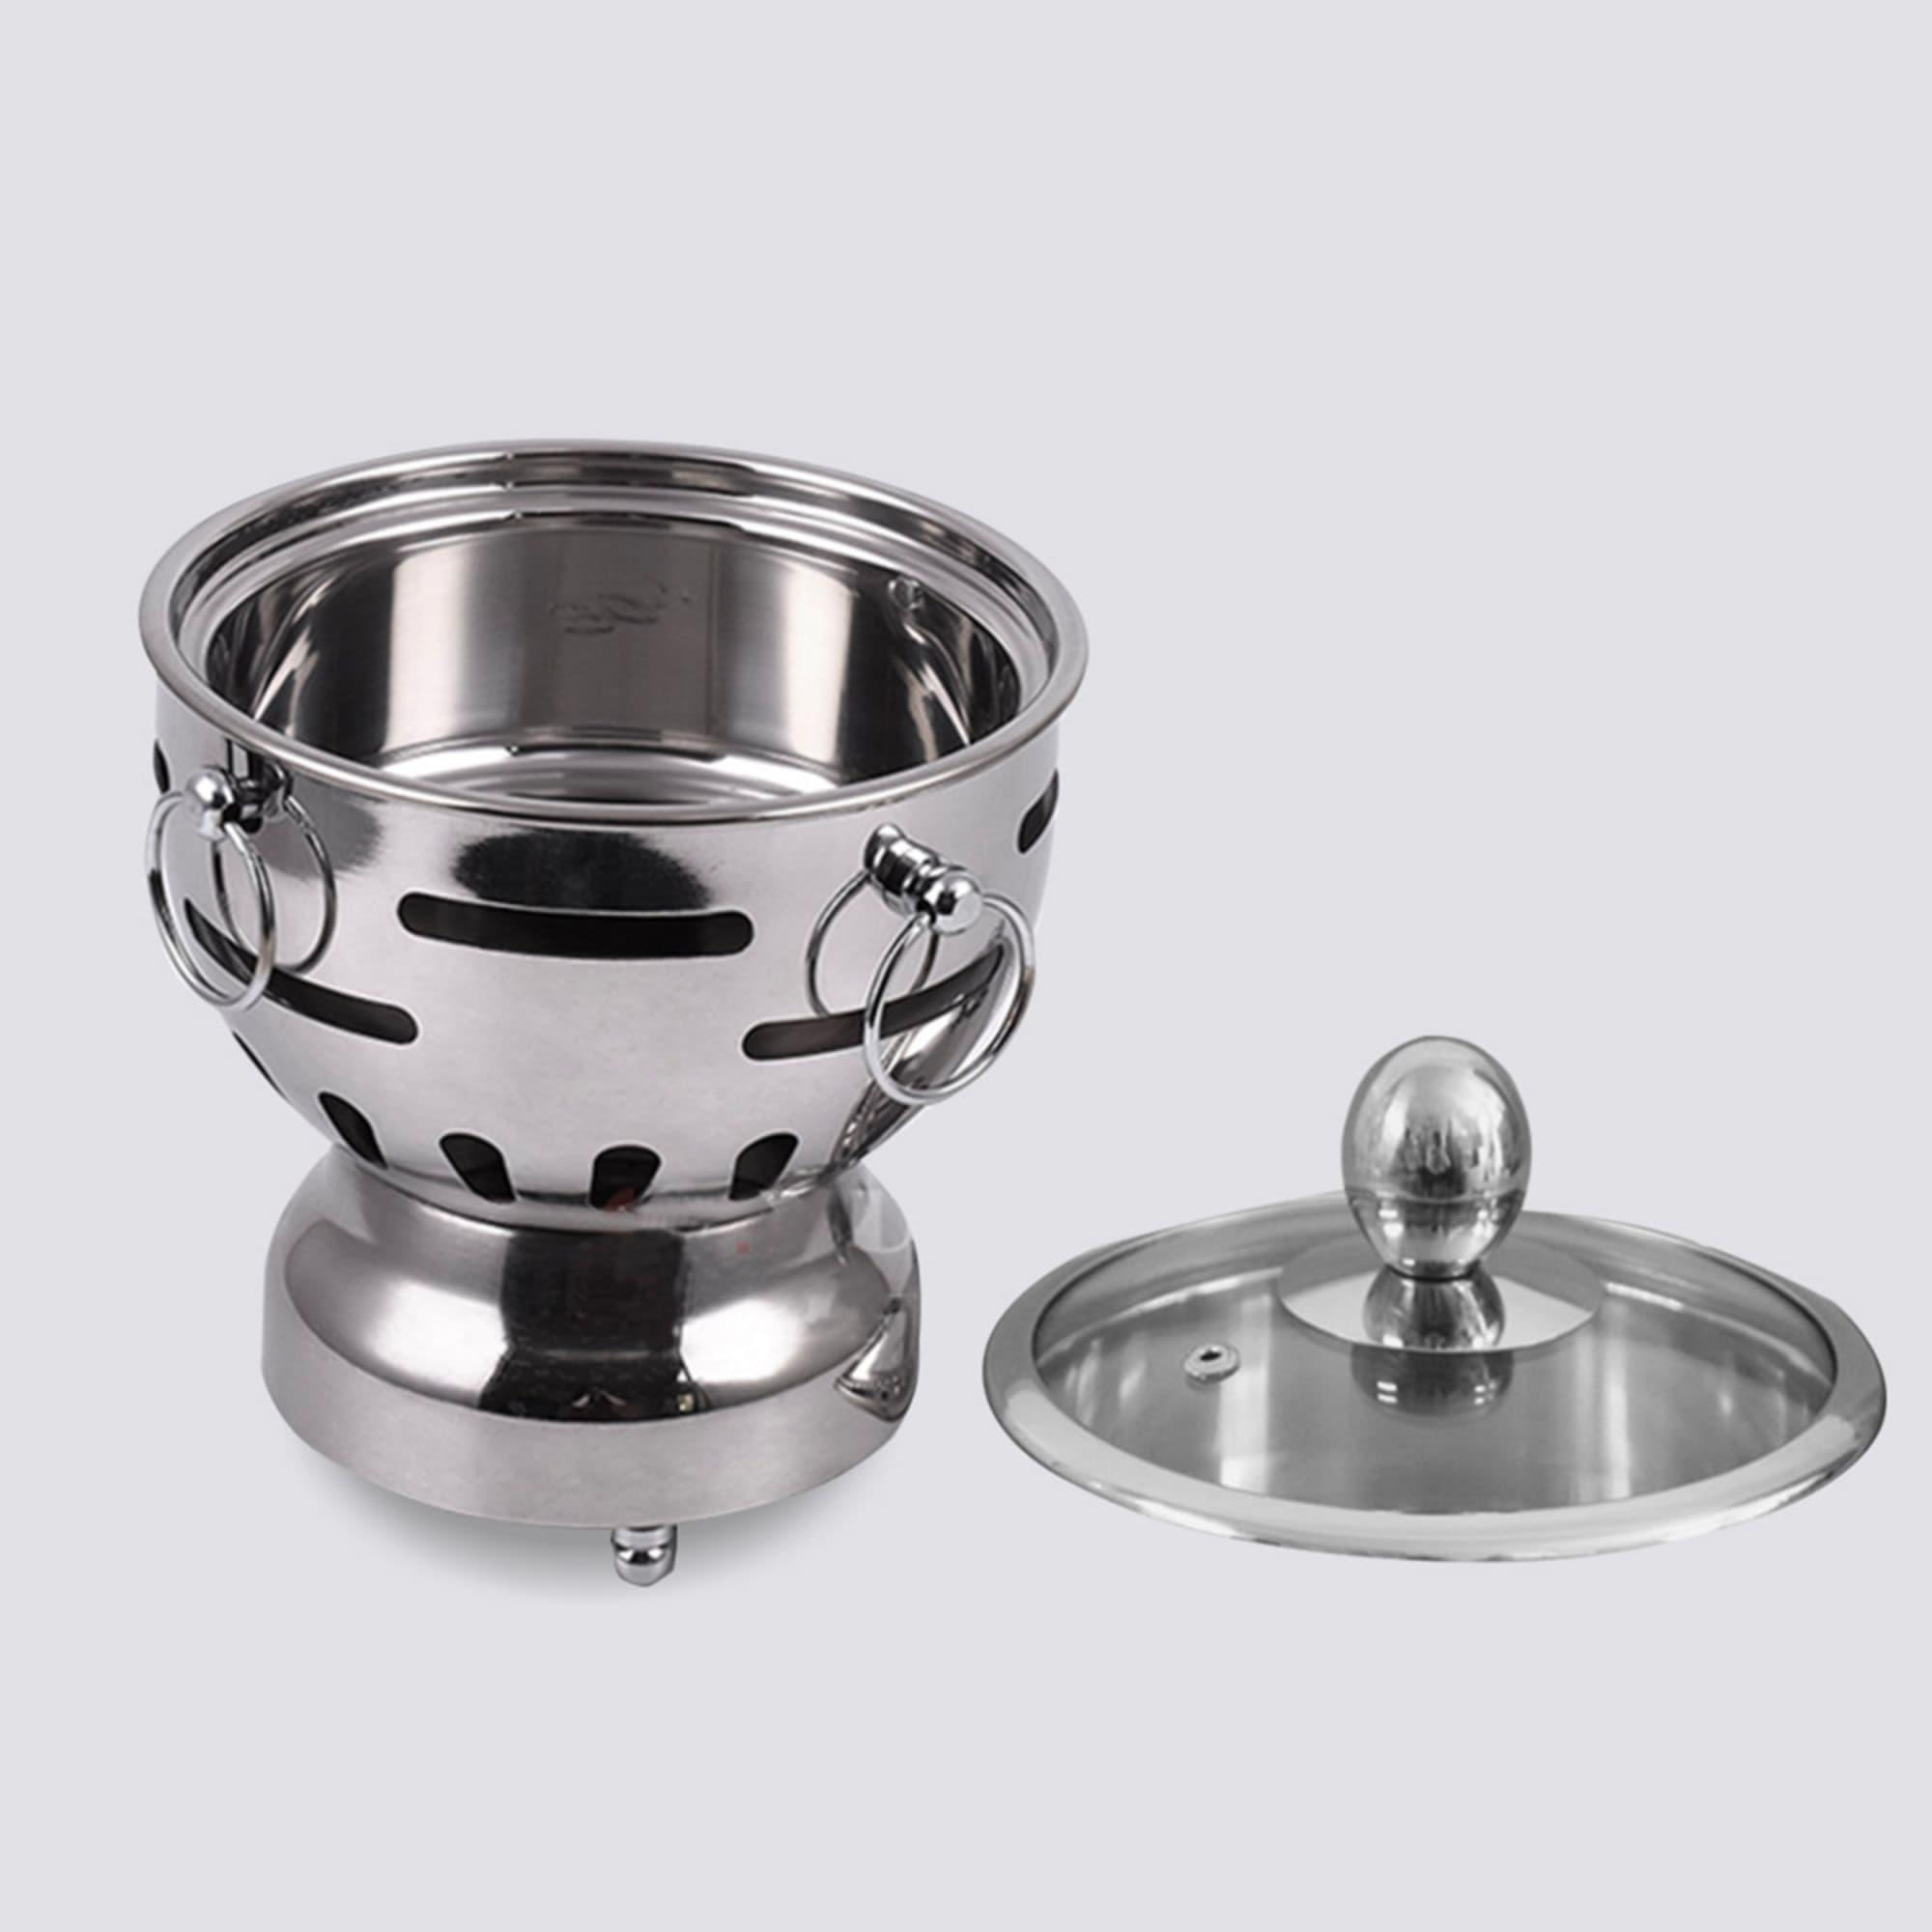 Soga Round Stainless Steel Single Hot Pot with Glass Lid 18.5cm Image 5